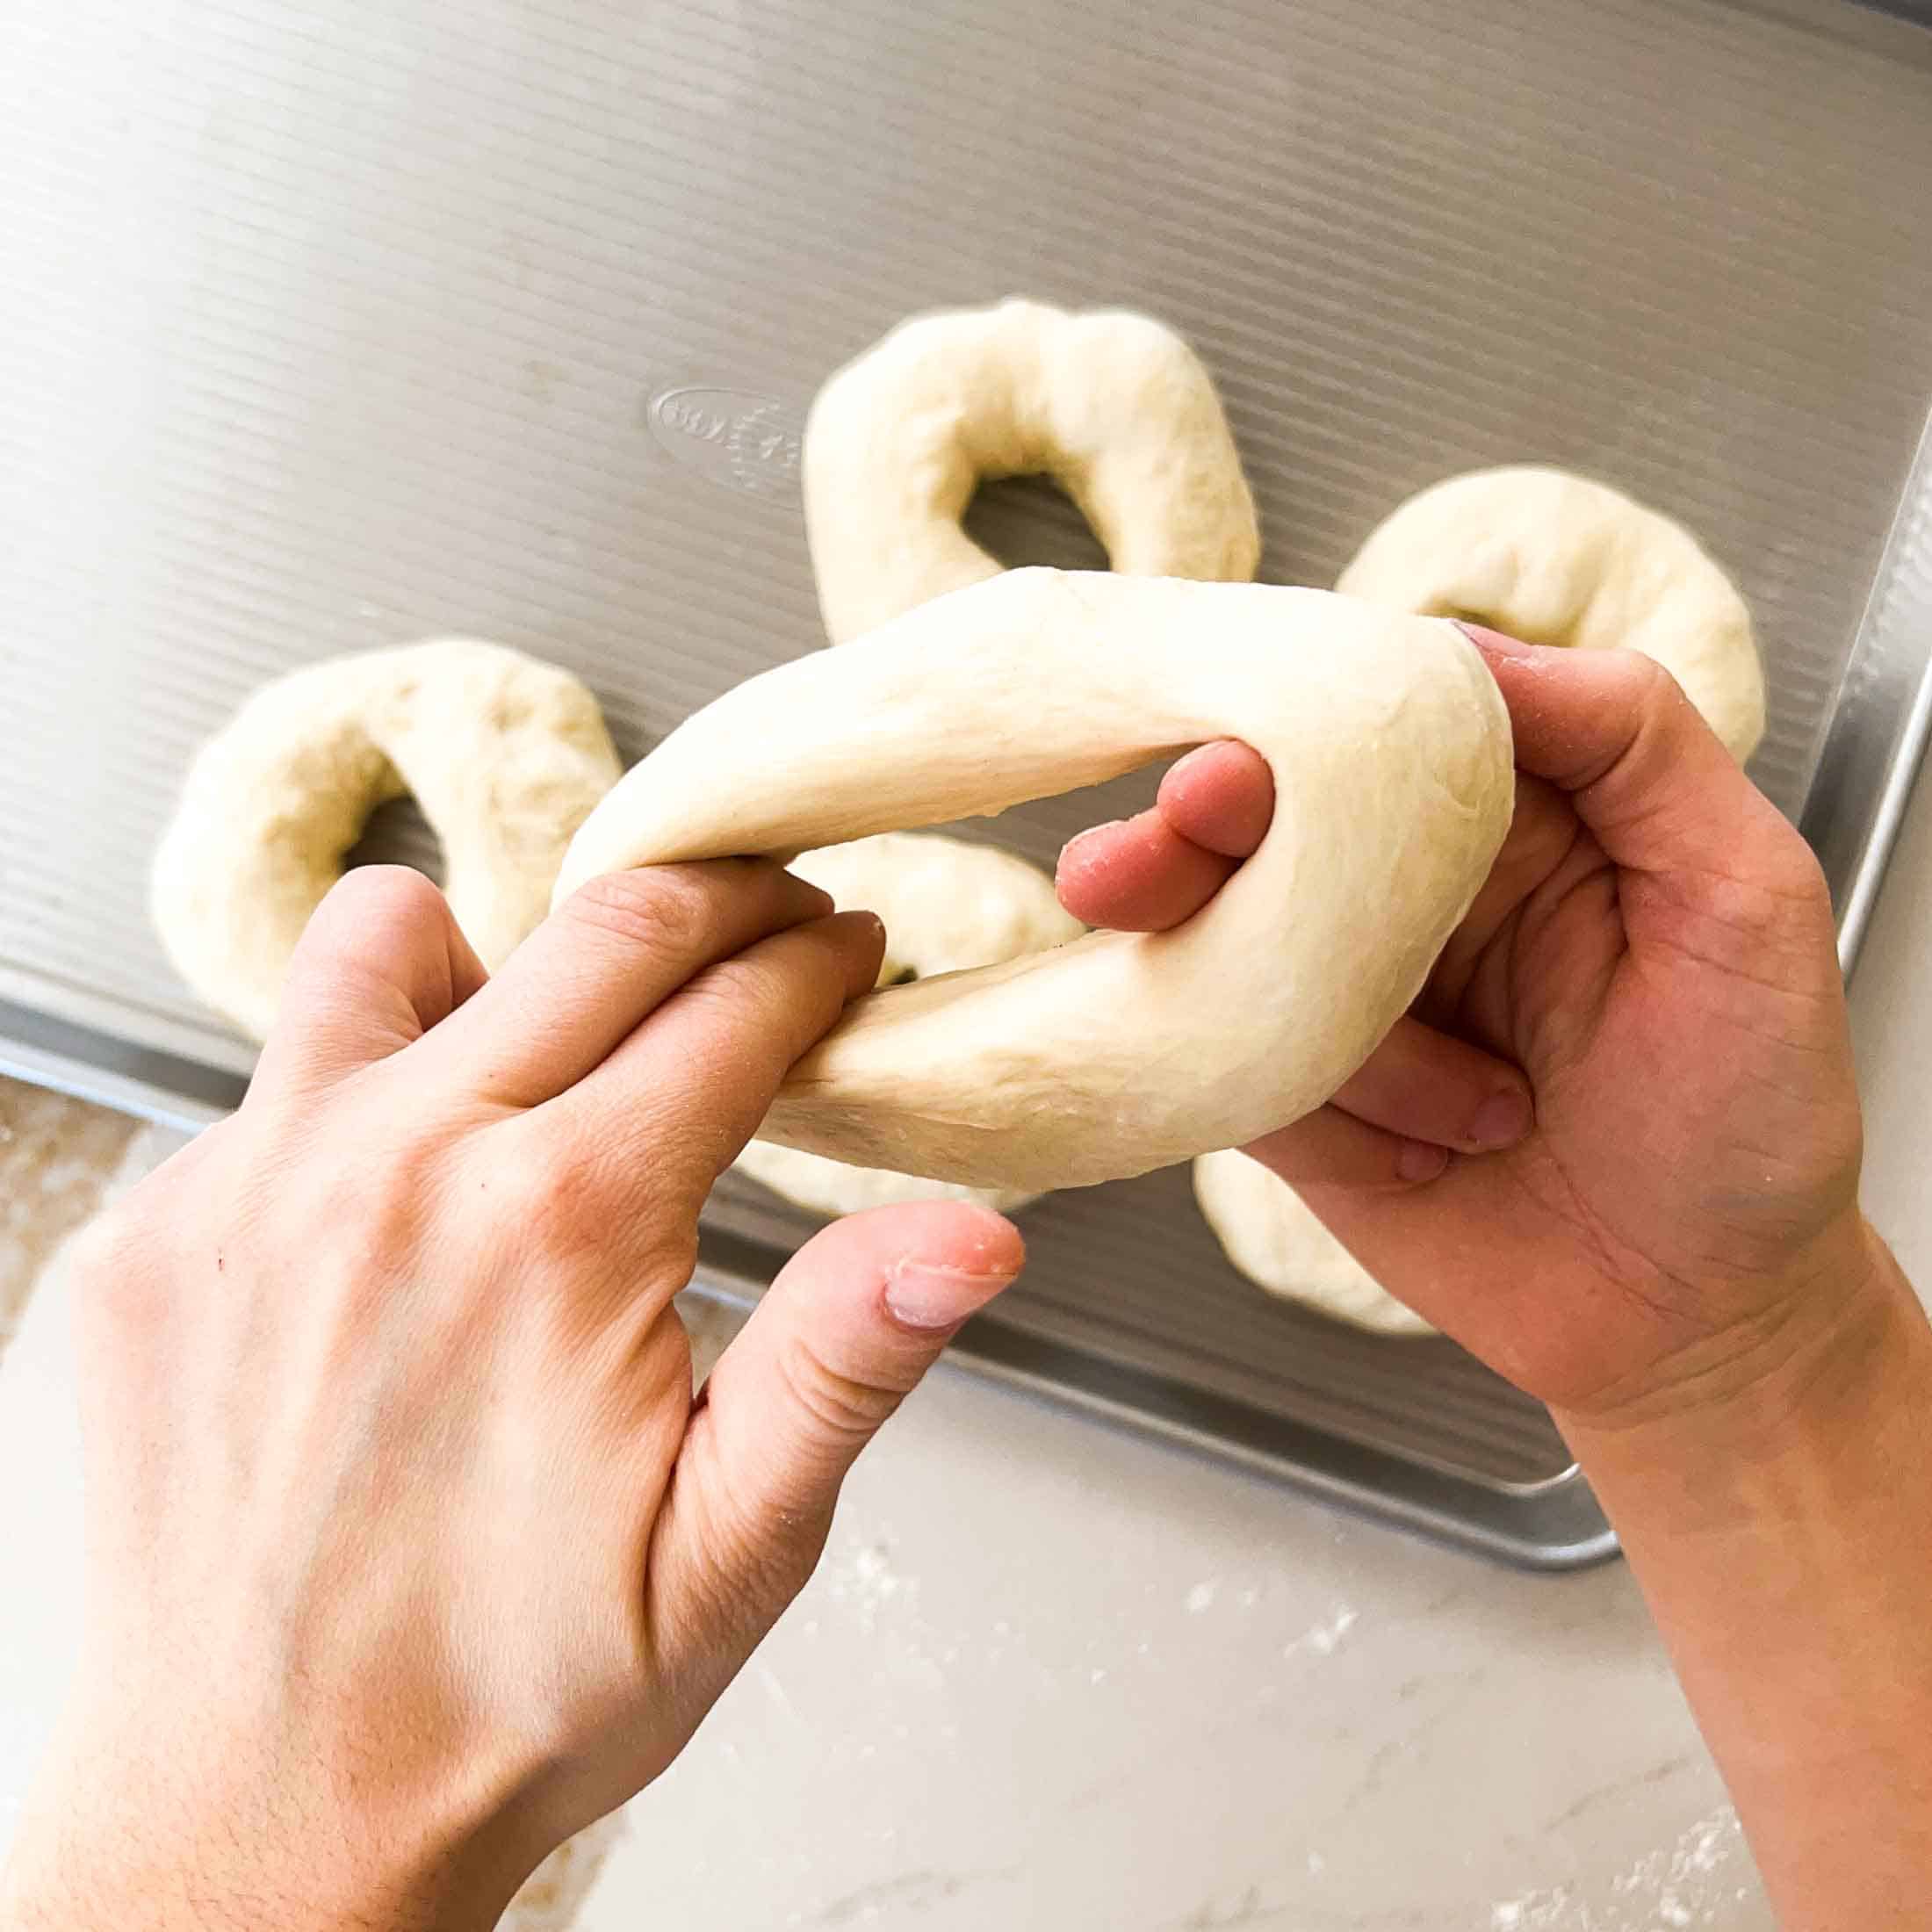 Gently stretching bagel dough to form holes in the middle.